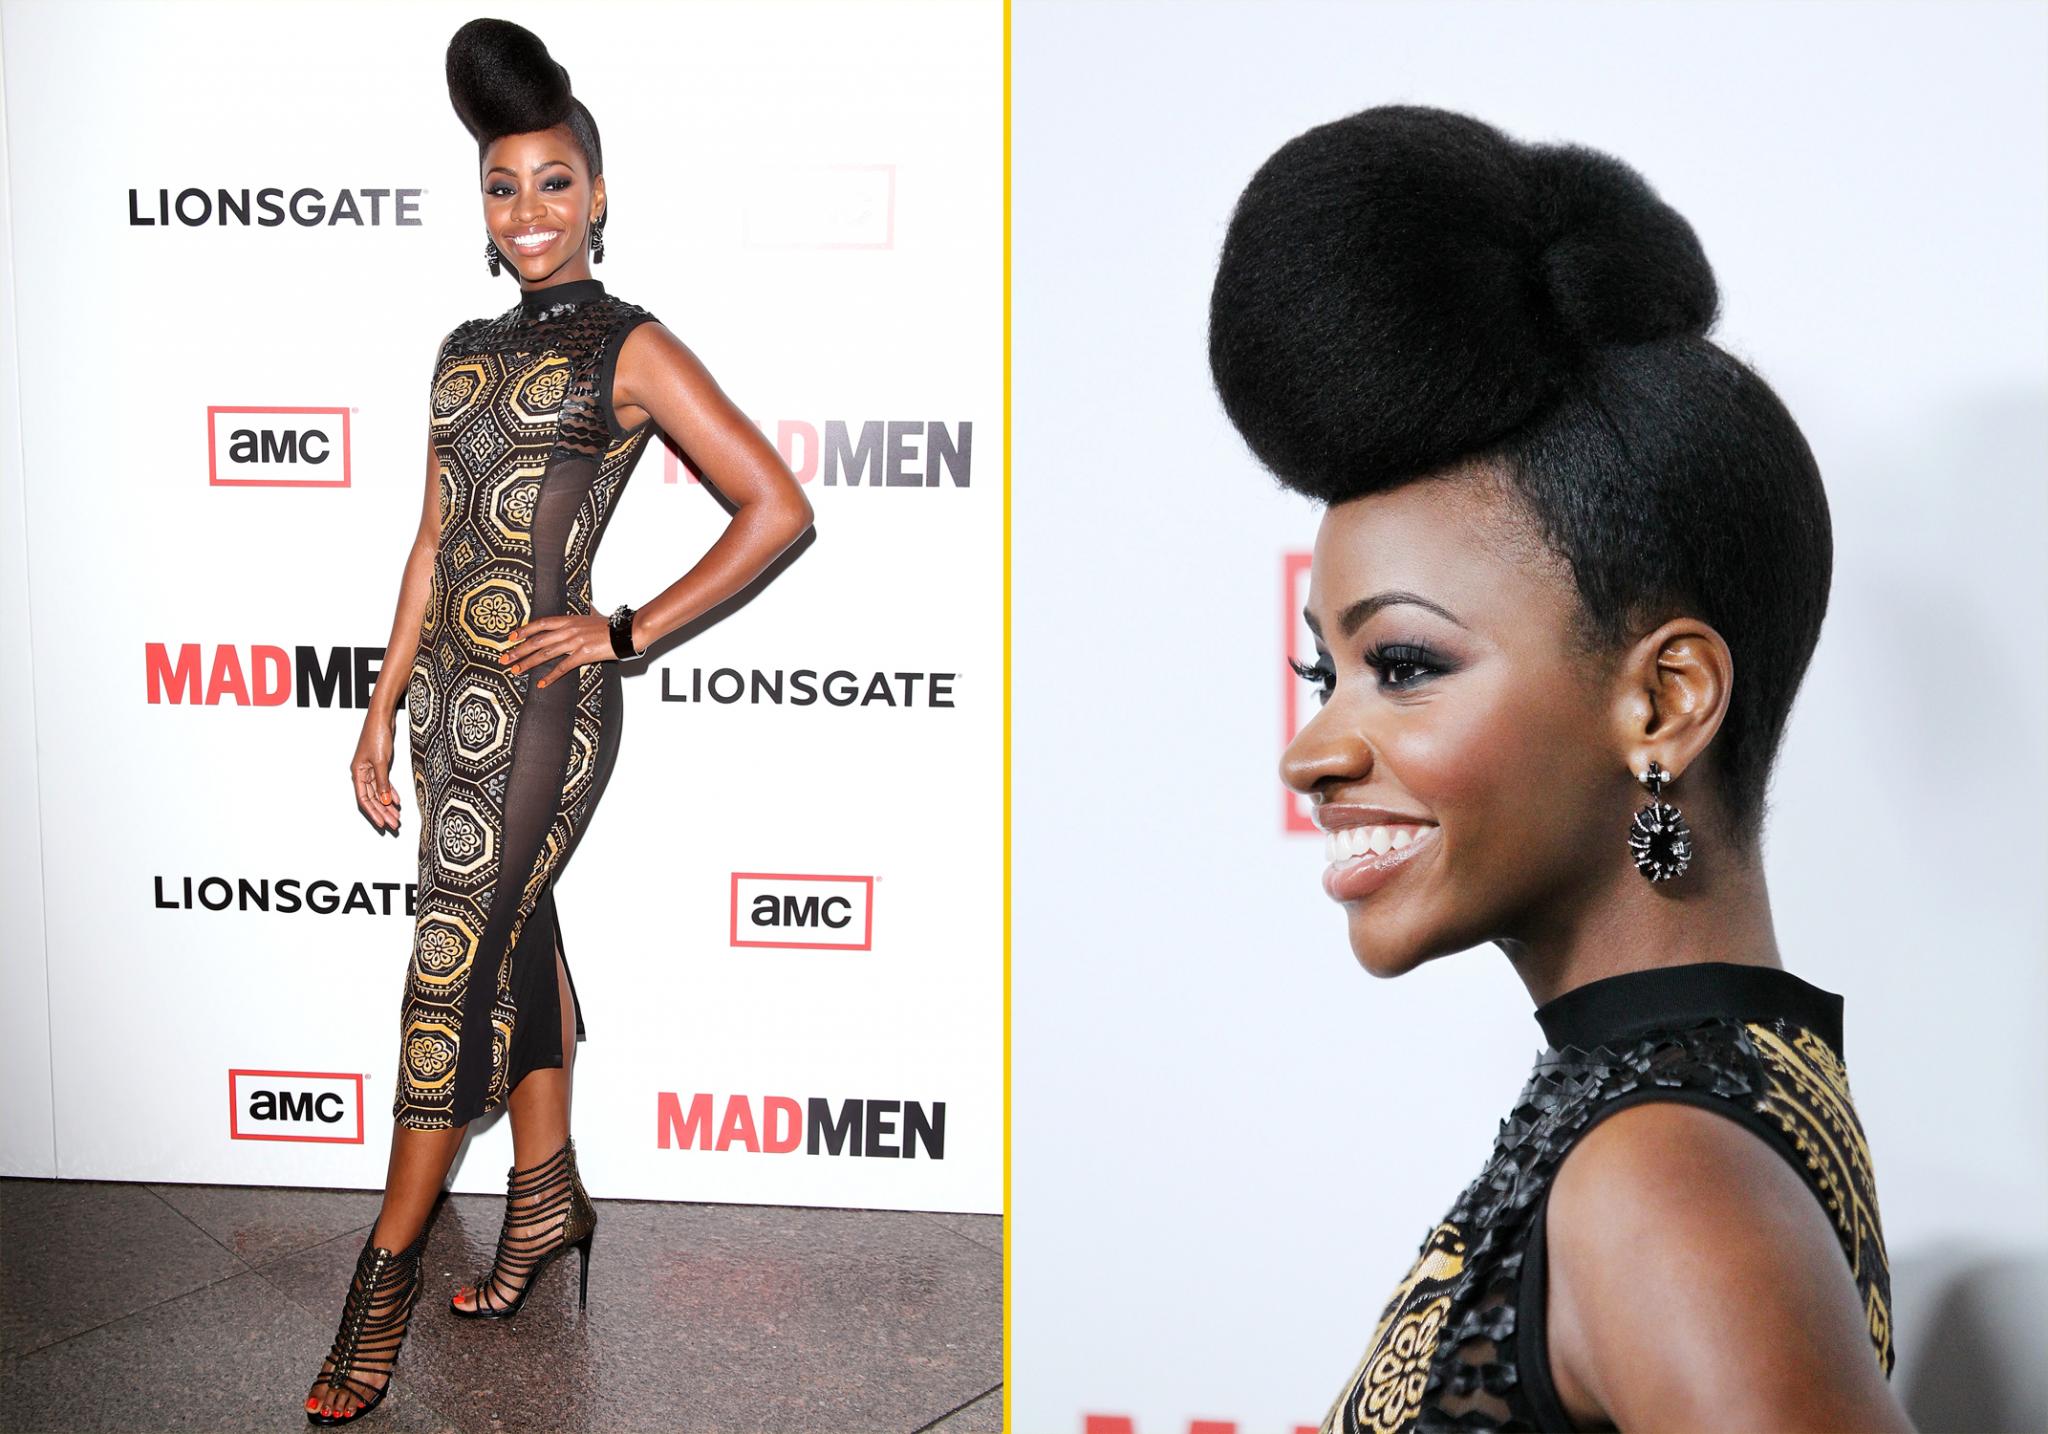 Hairstyle File: Teyonah Parris’s Natural Style